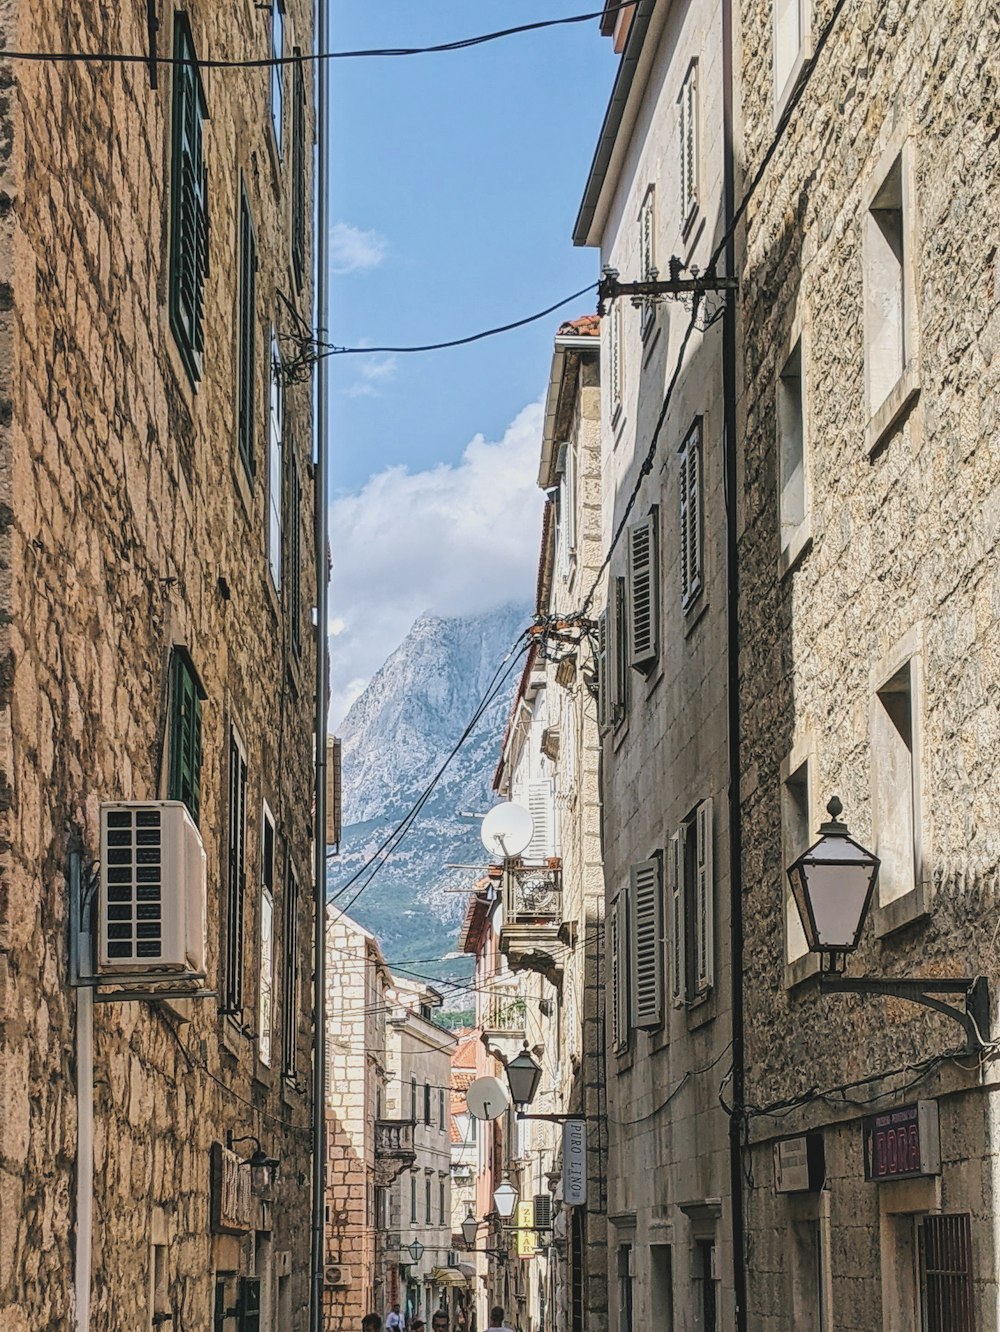 a cobblestone street with a mountain in the background